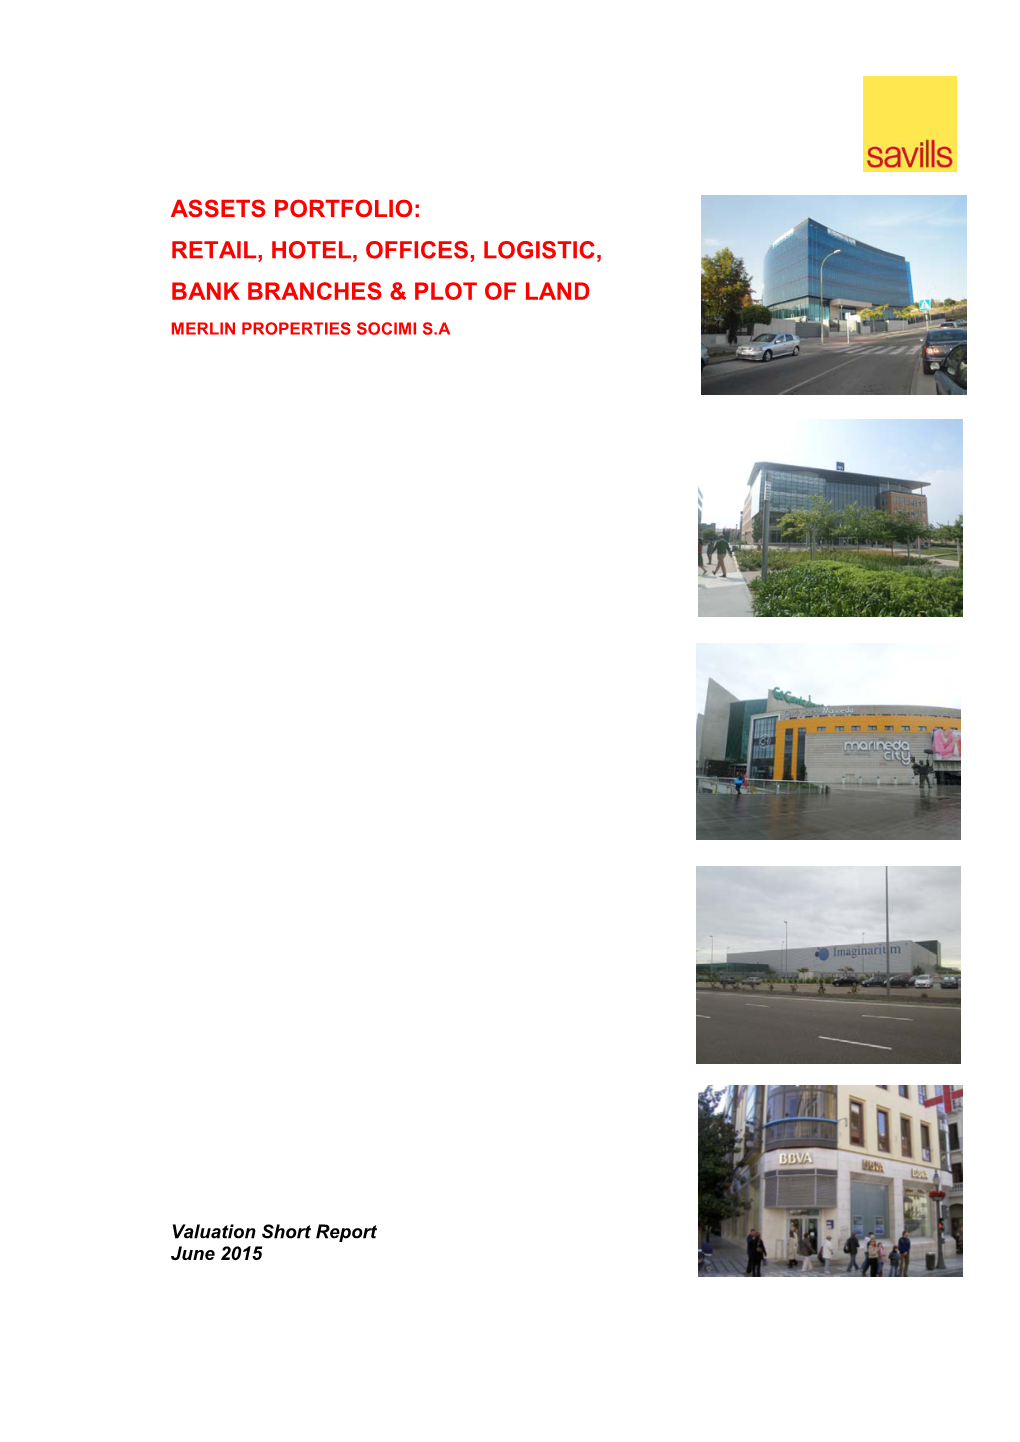 Assets Portfolio: Retail, Hotel, Offices, Logistic, Bank Branches & Plot of Land Merlin Properties Socimi S.A